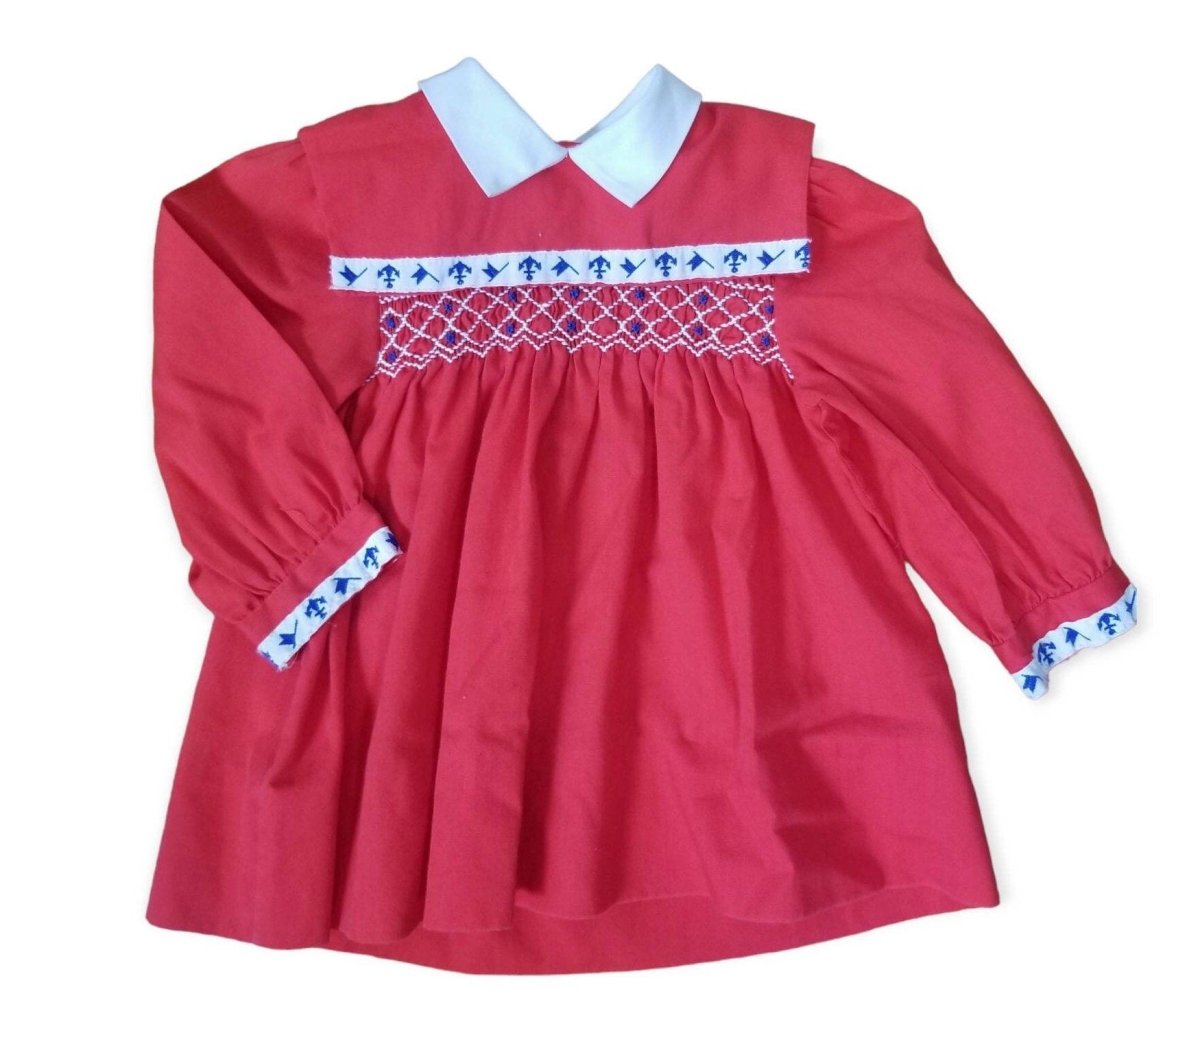 70s/80s Polly Flinders Smocked Red Anchor Dress 2T - themallvintage The Mall Vintage 1970s 1980s Baby